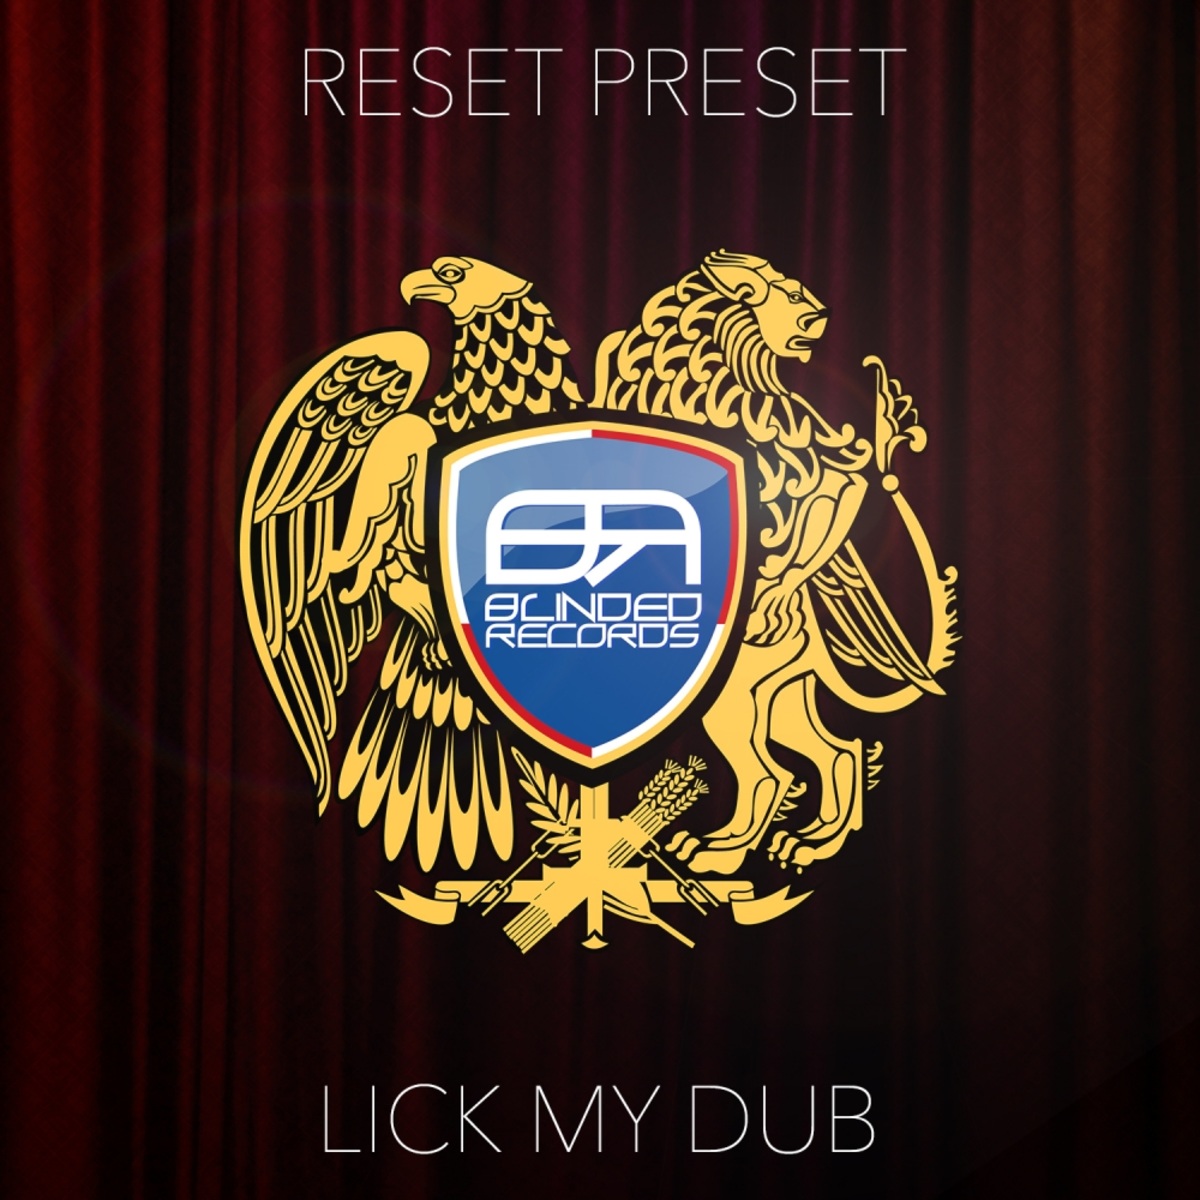 Reset Preset - Lick My Dub / Blinded Records